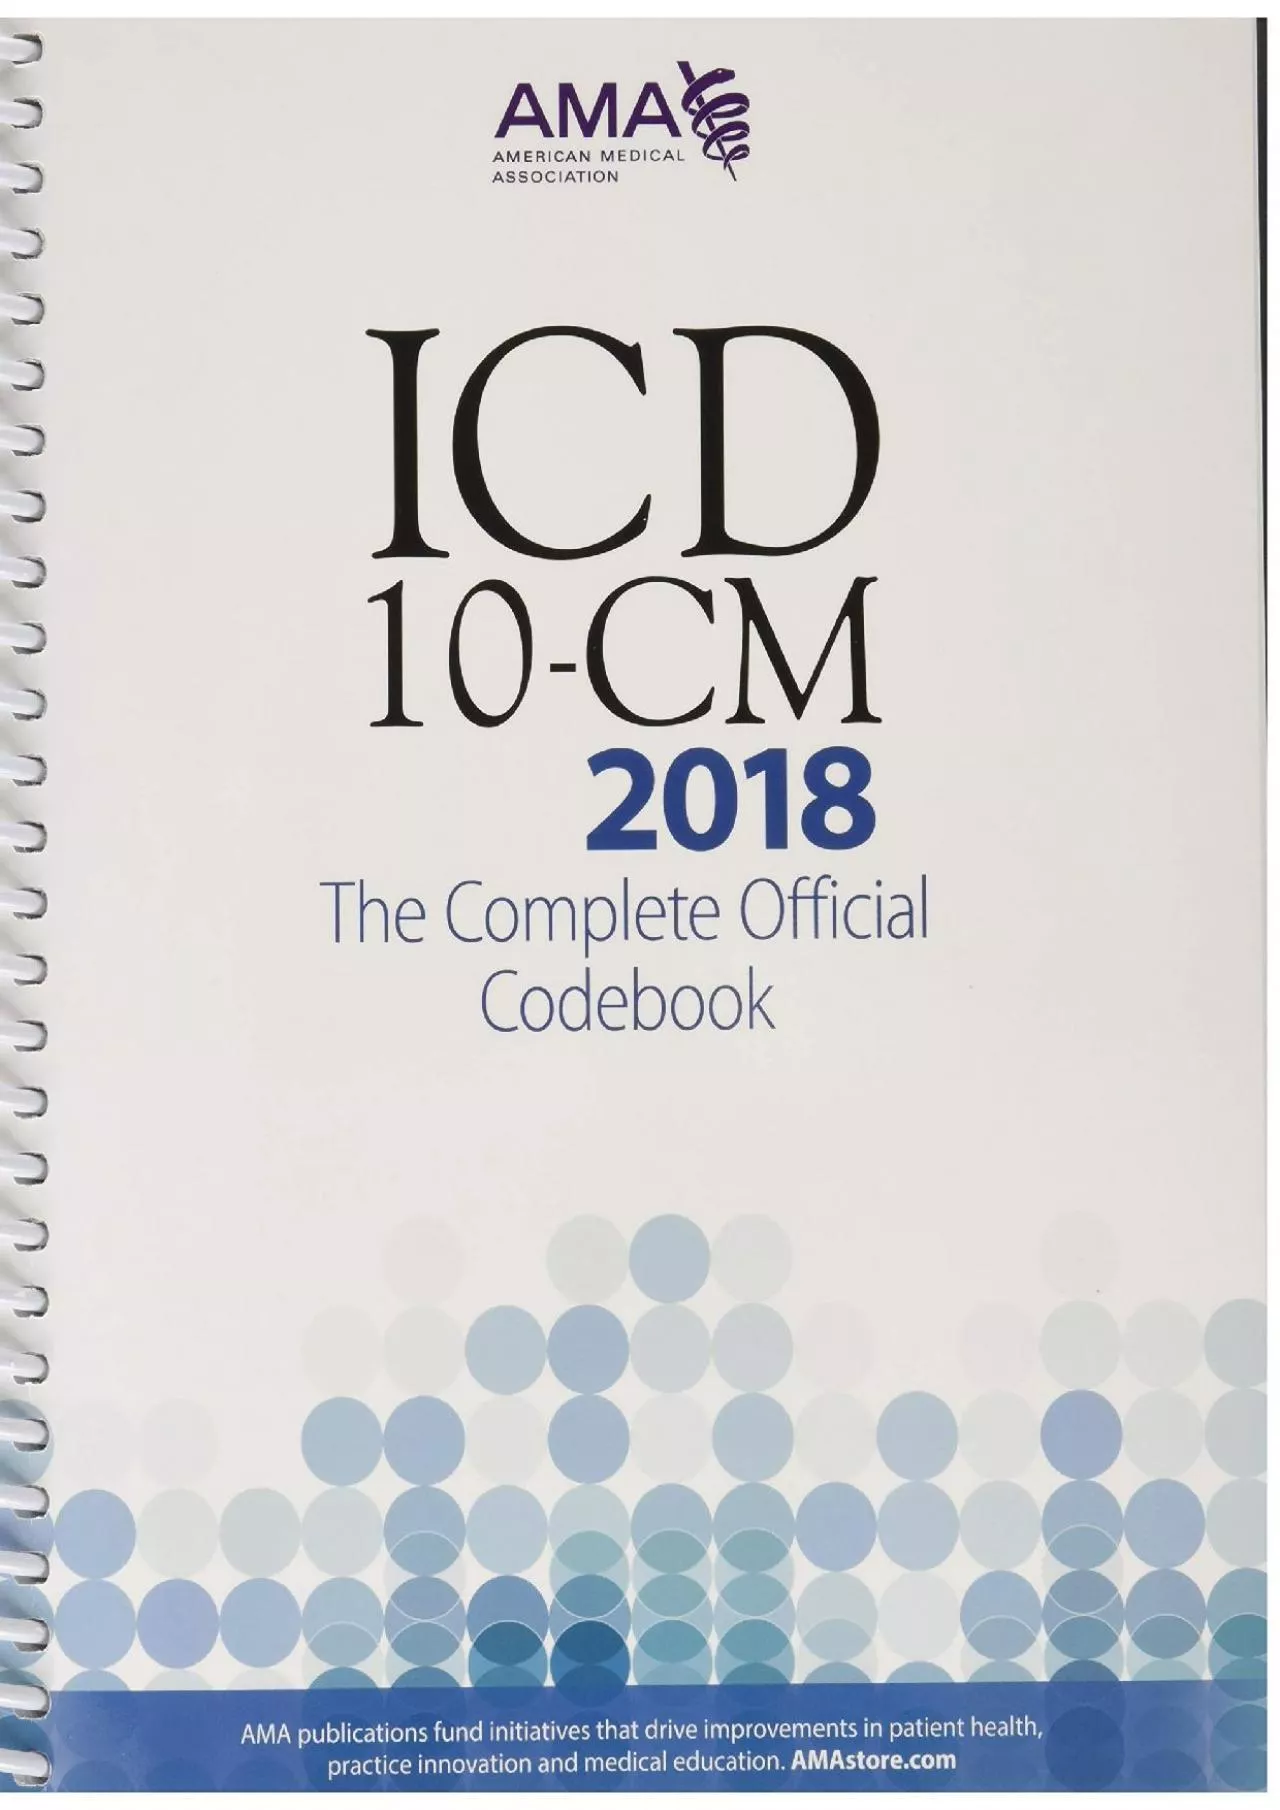 (EBOOK)-ICD-10-CM 2018: The Complete Official Codebook (Icd-10-Cm the Complete Official